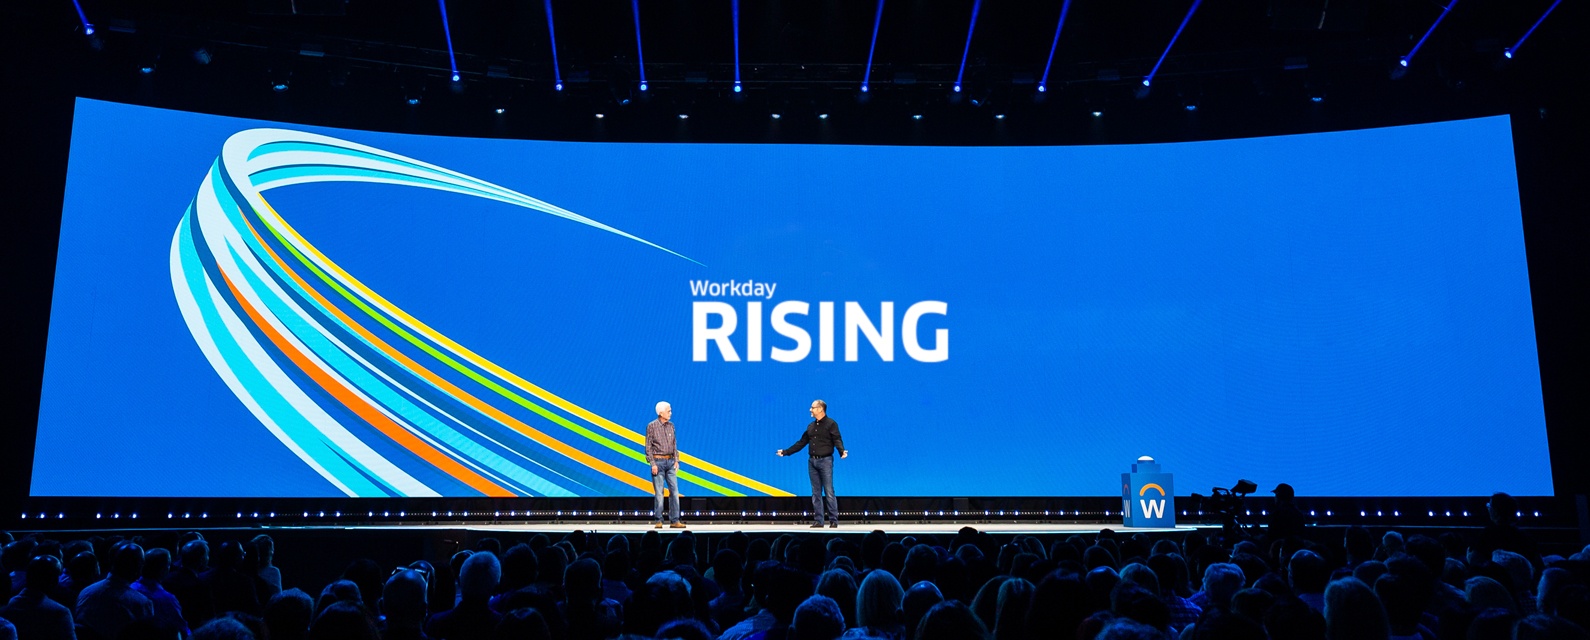 Workday Rising: Preparing for the Future Together